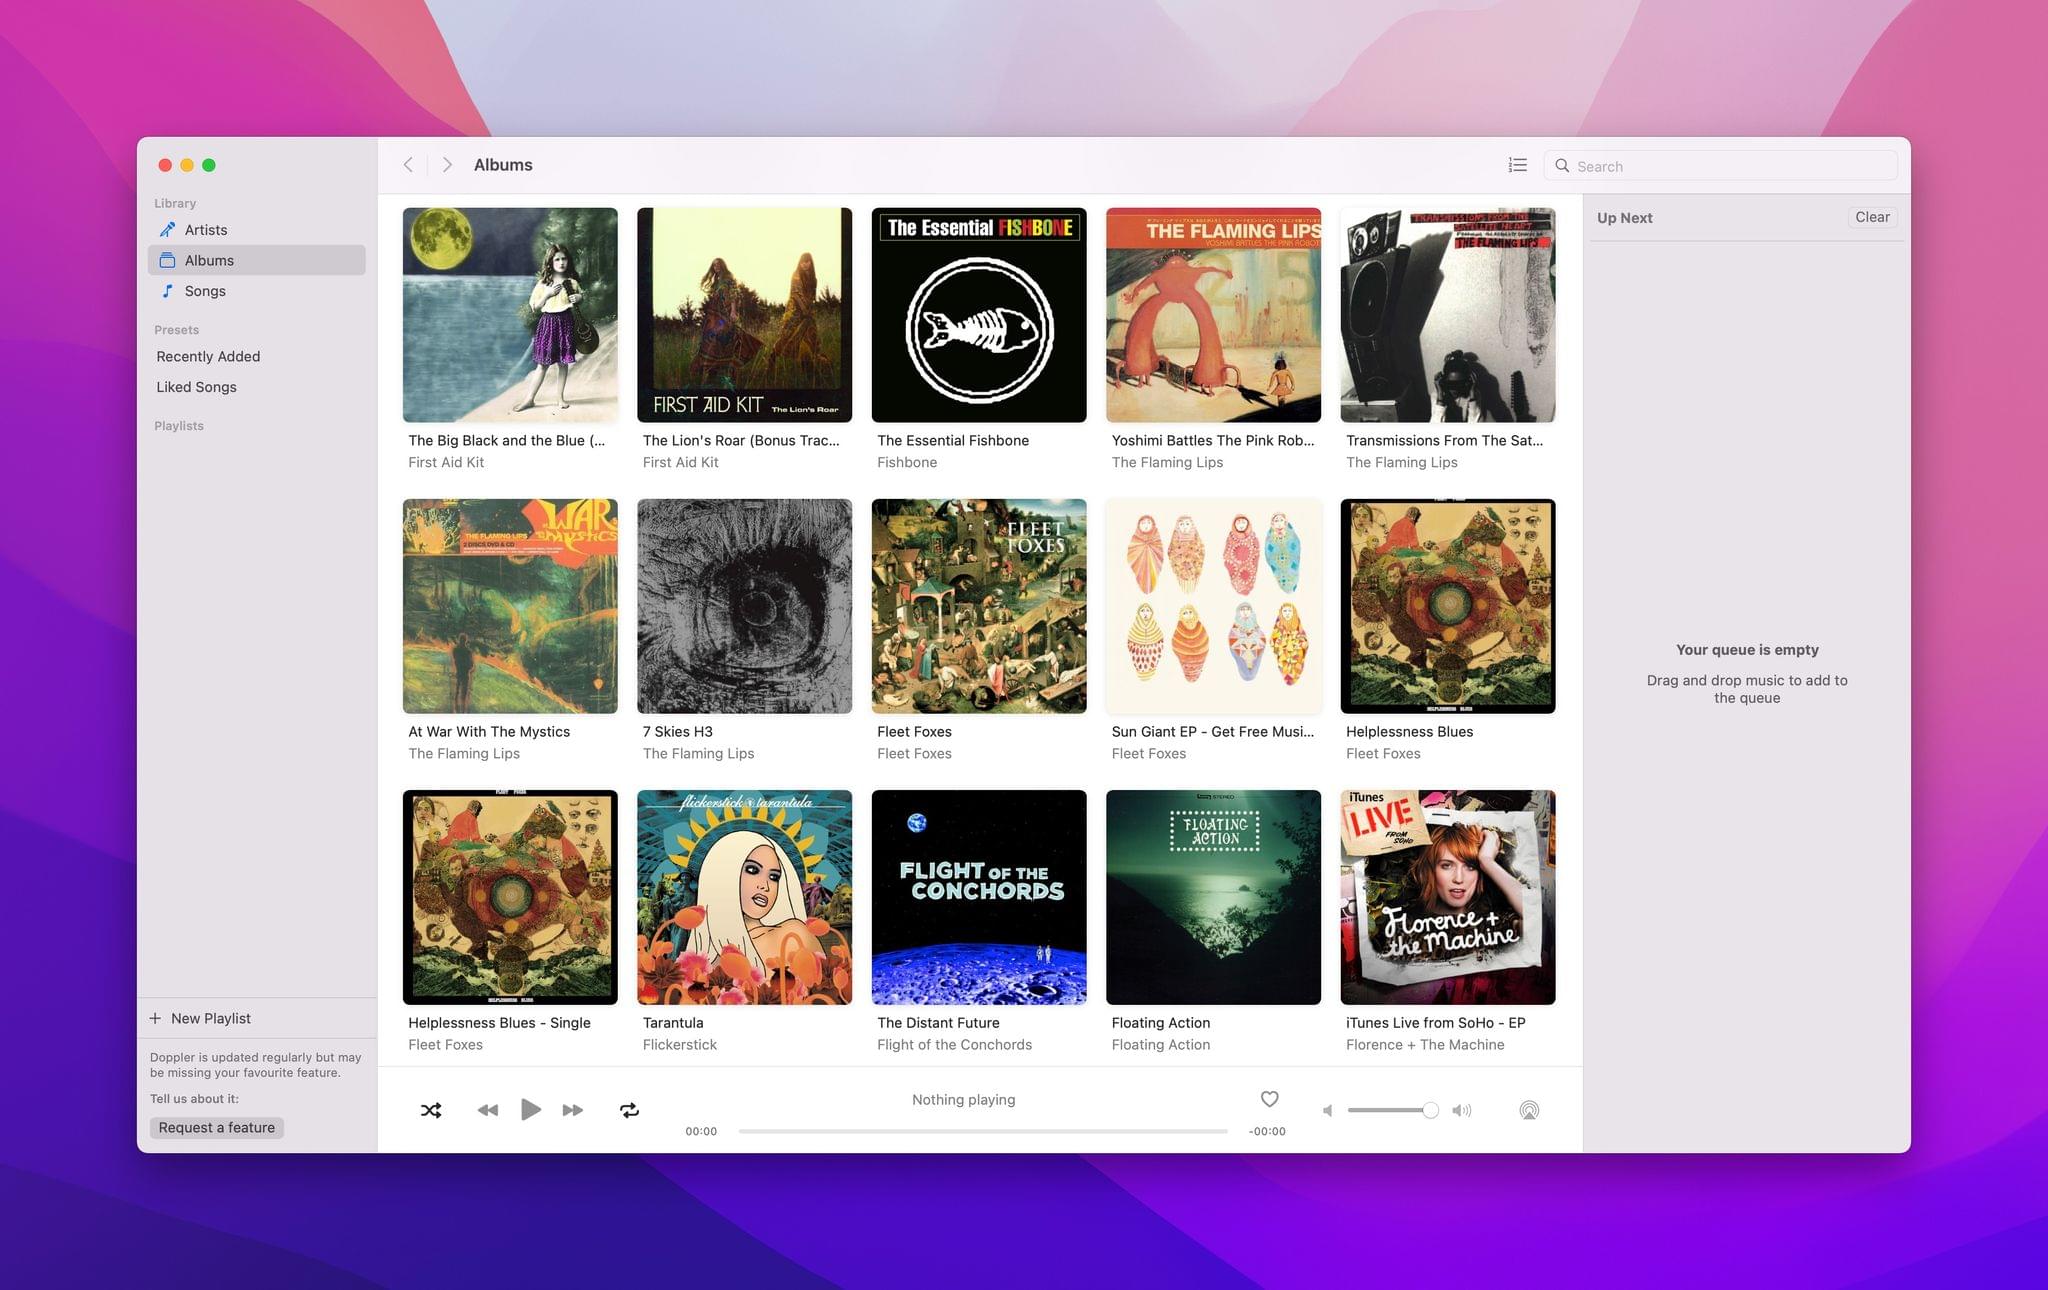 Doppler's artwork-focused UI is a breath of fresh air for anyone who own's their music.